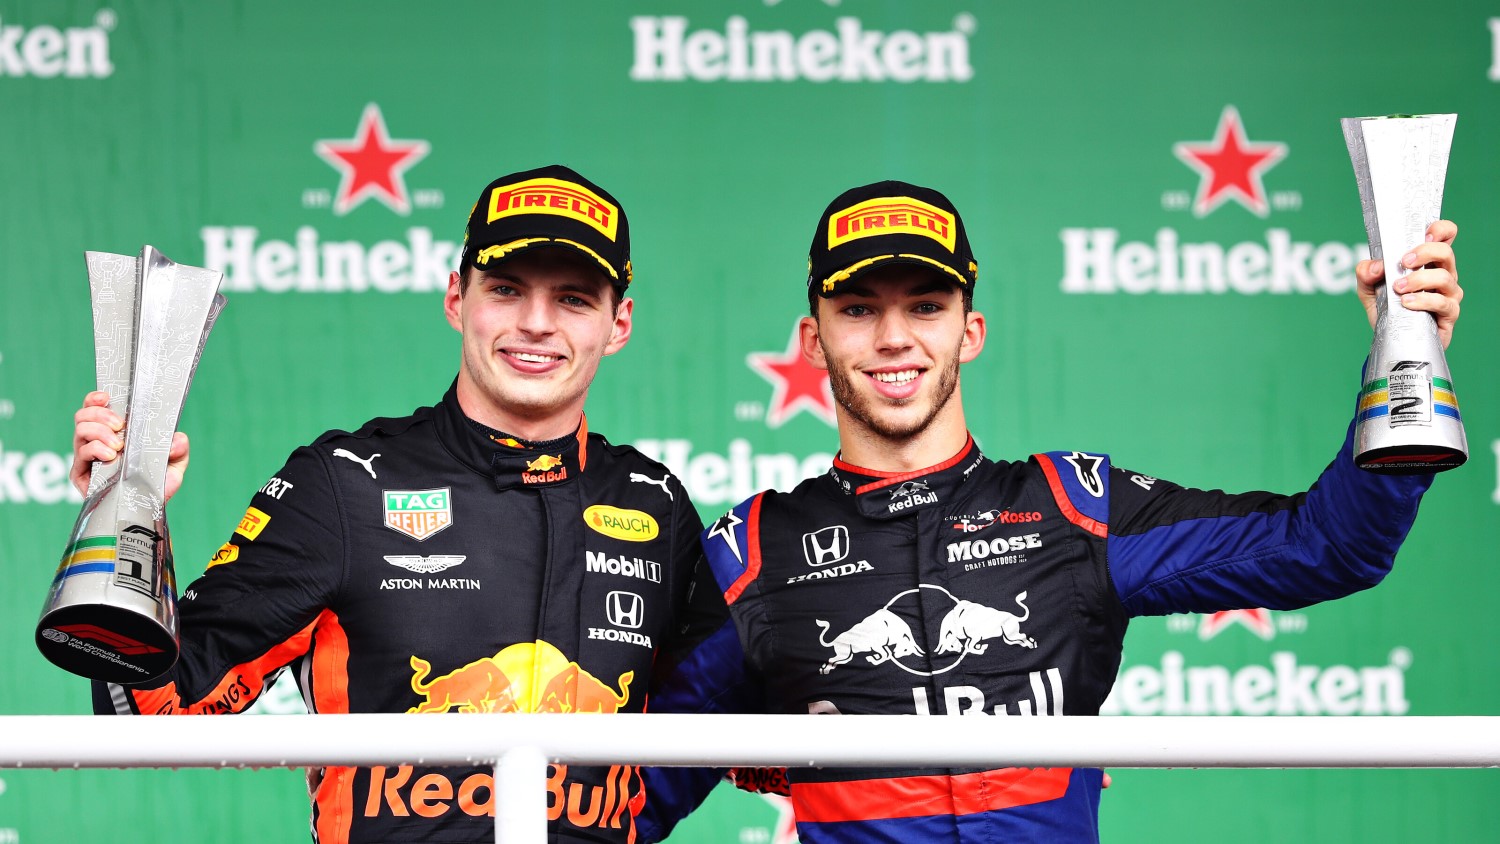 Gasly (R) has one good race